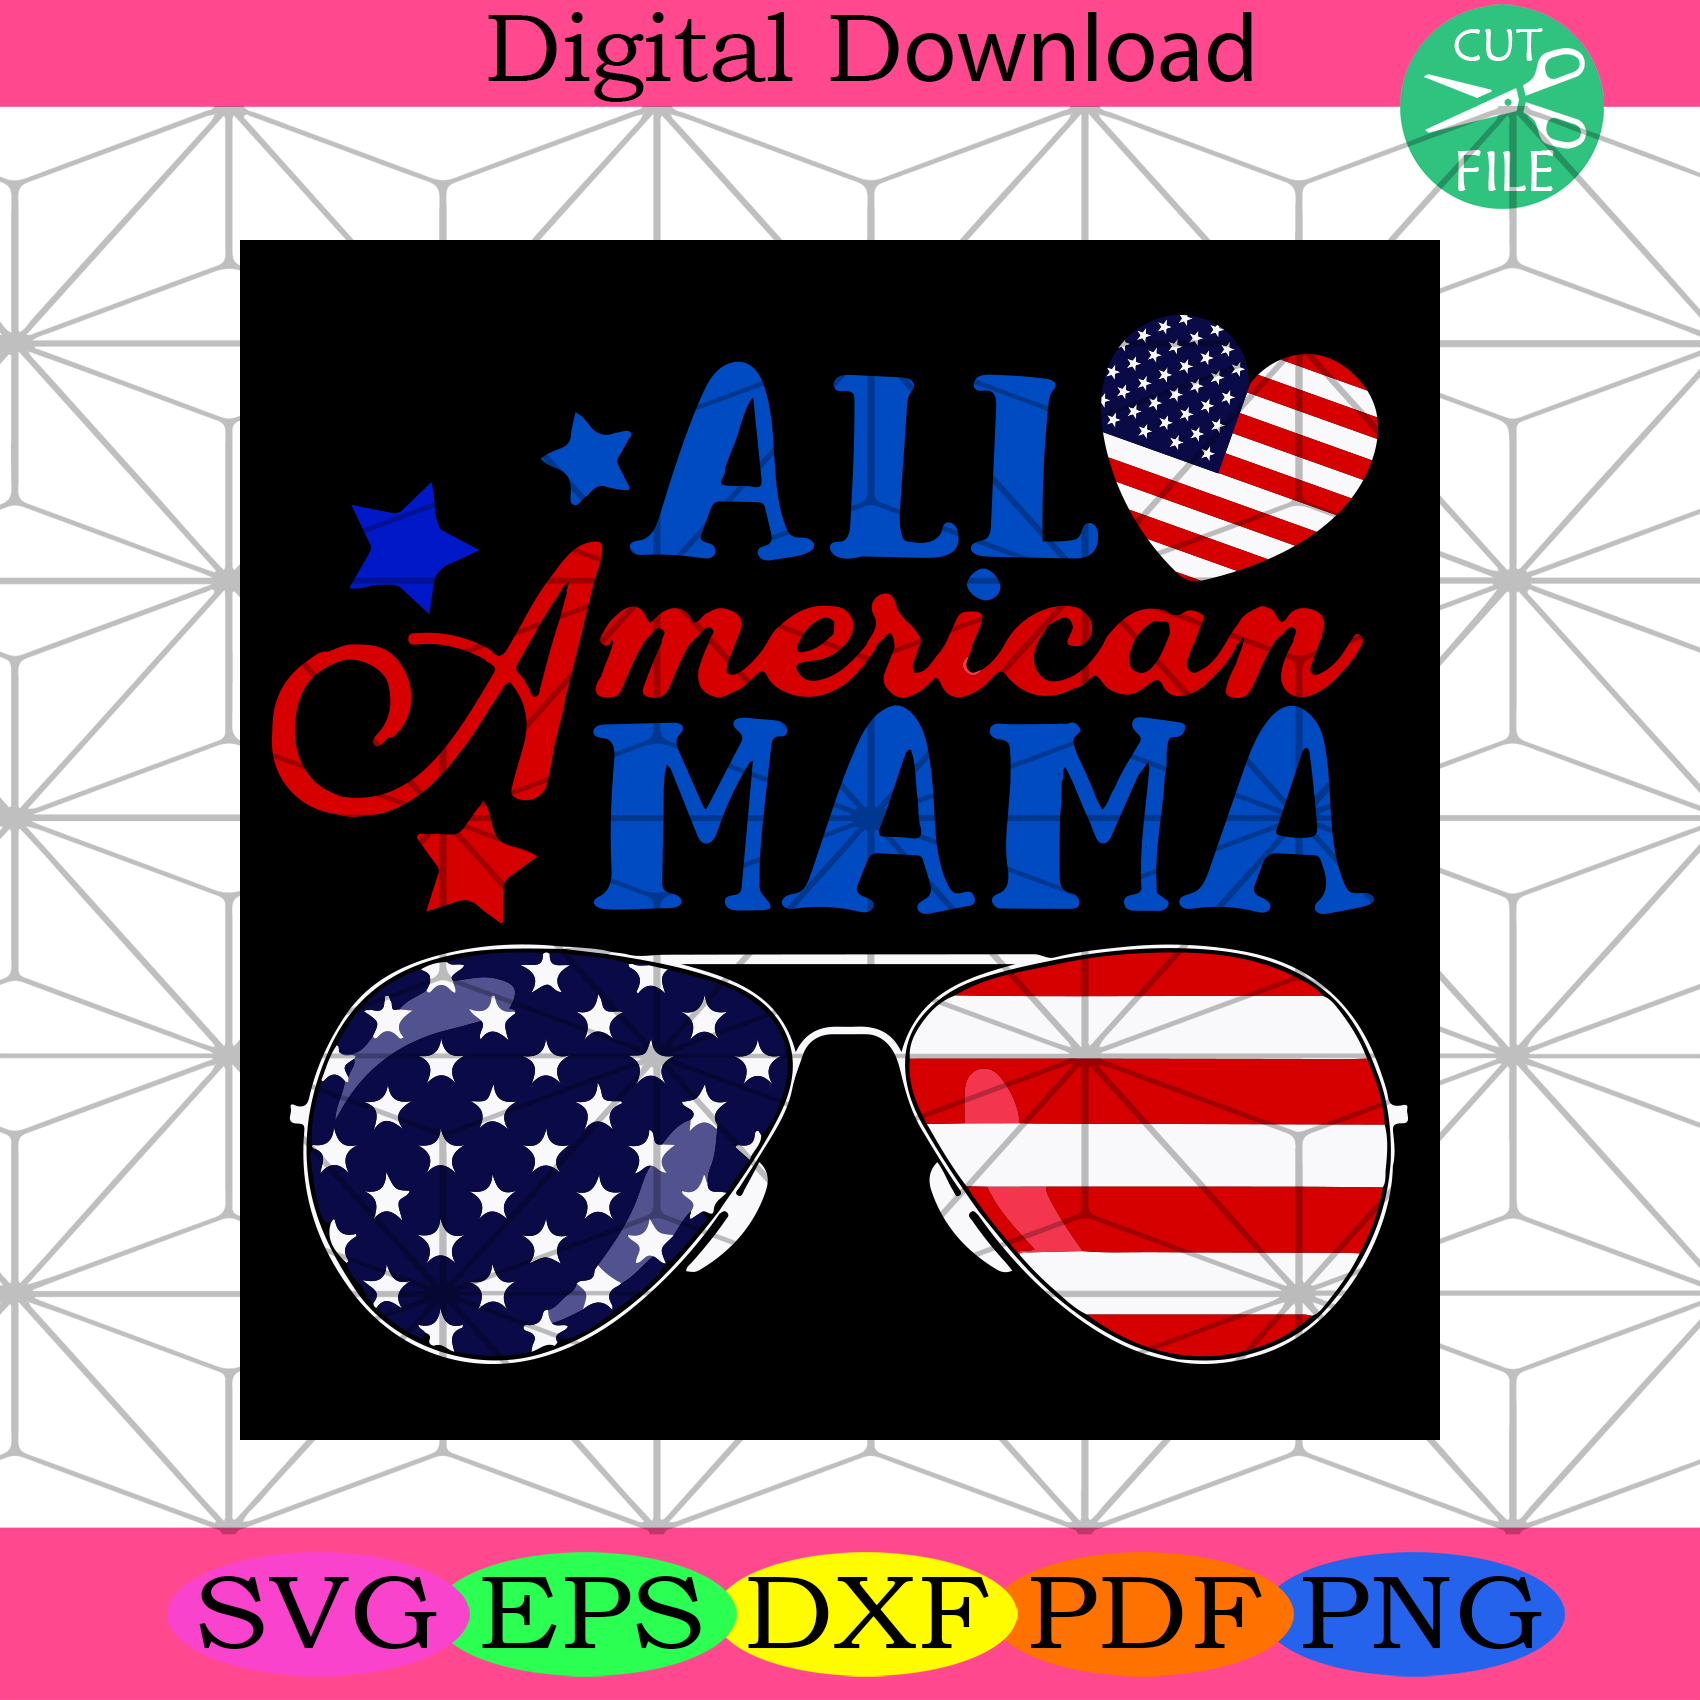 All American Mama Svg Mothers Day Svg, Mom Svg, American Mama Svg